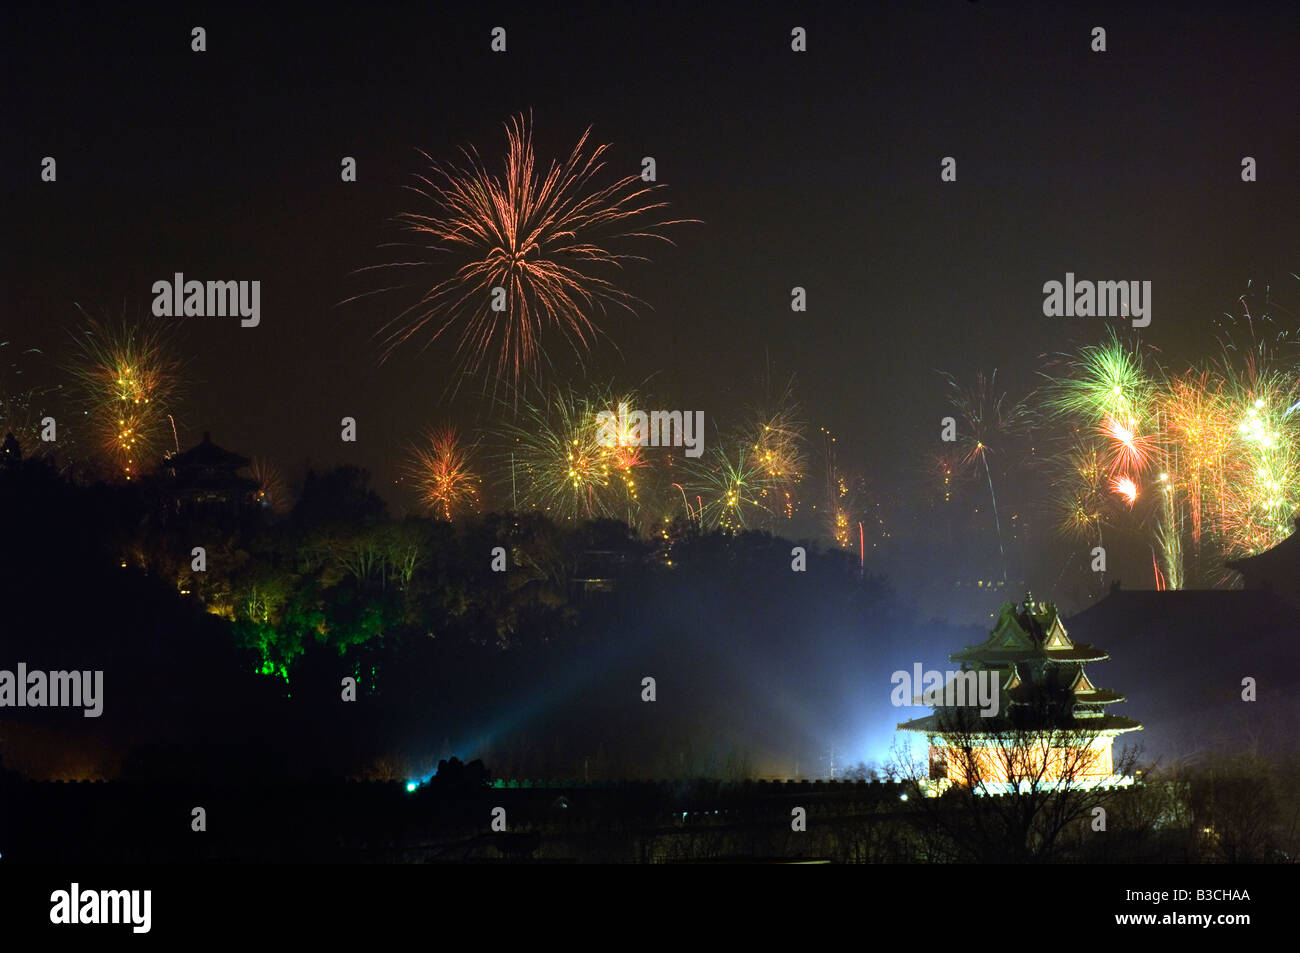 China, Beijing. Chinese New Year Spring Festival - fireworks display. Stock Photo